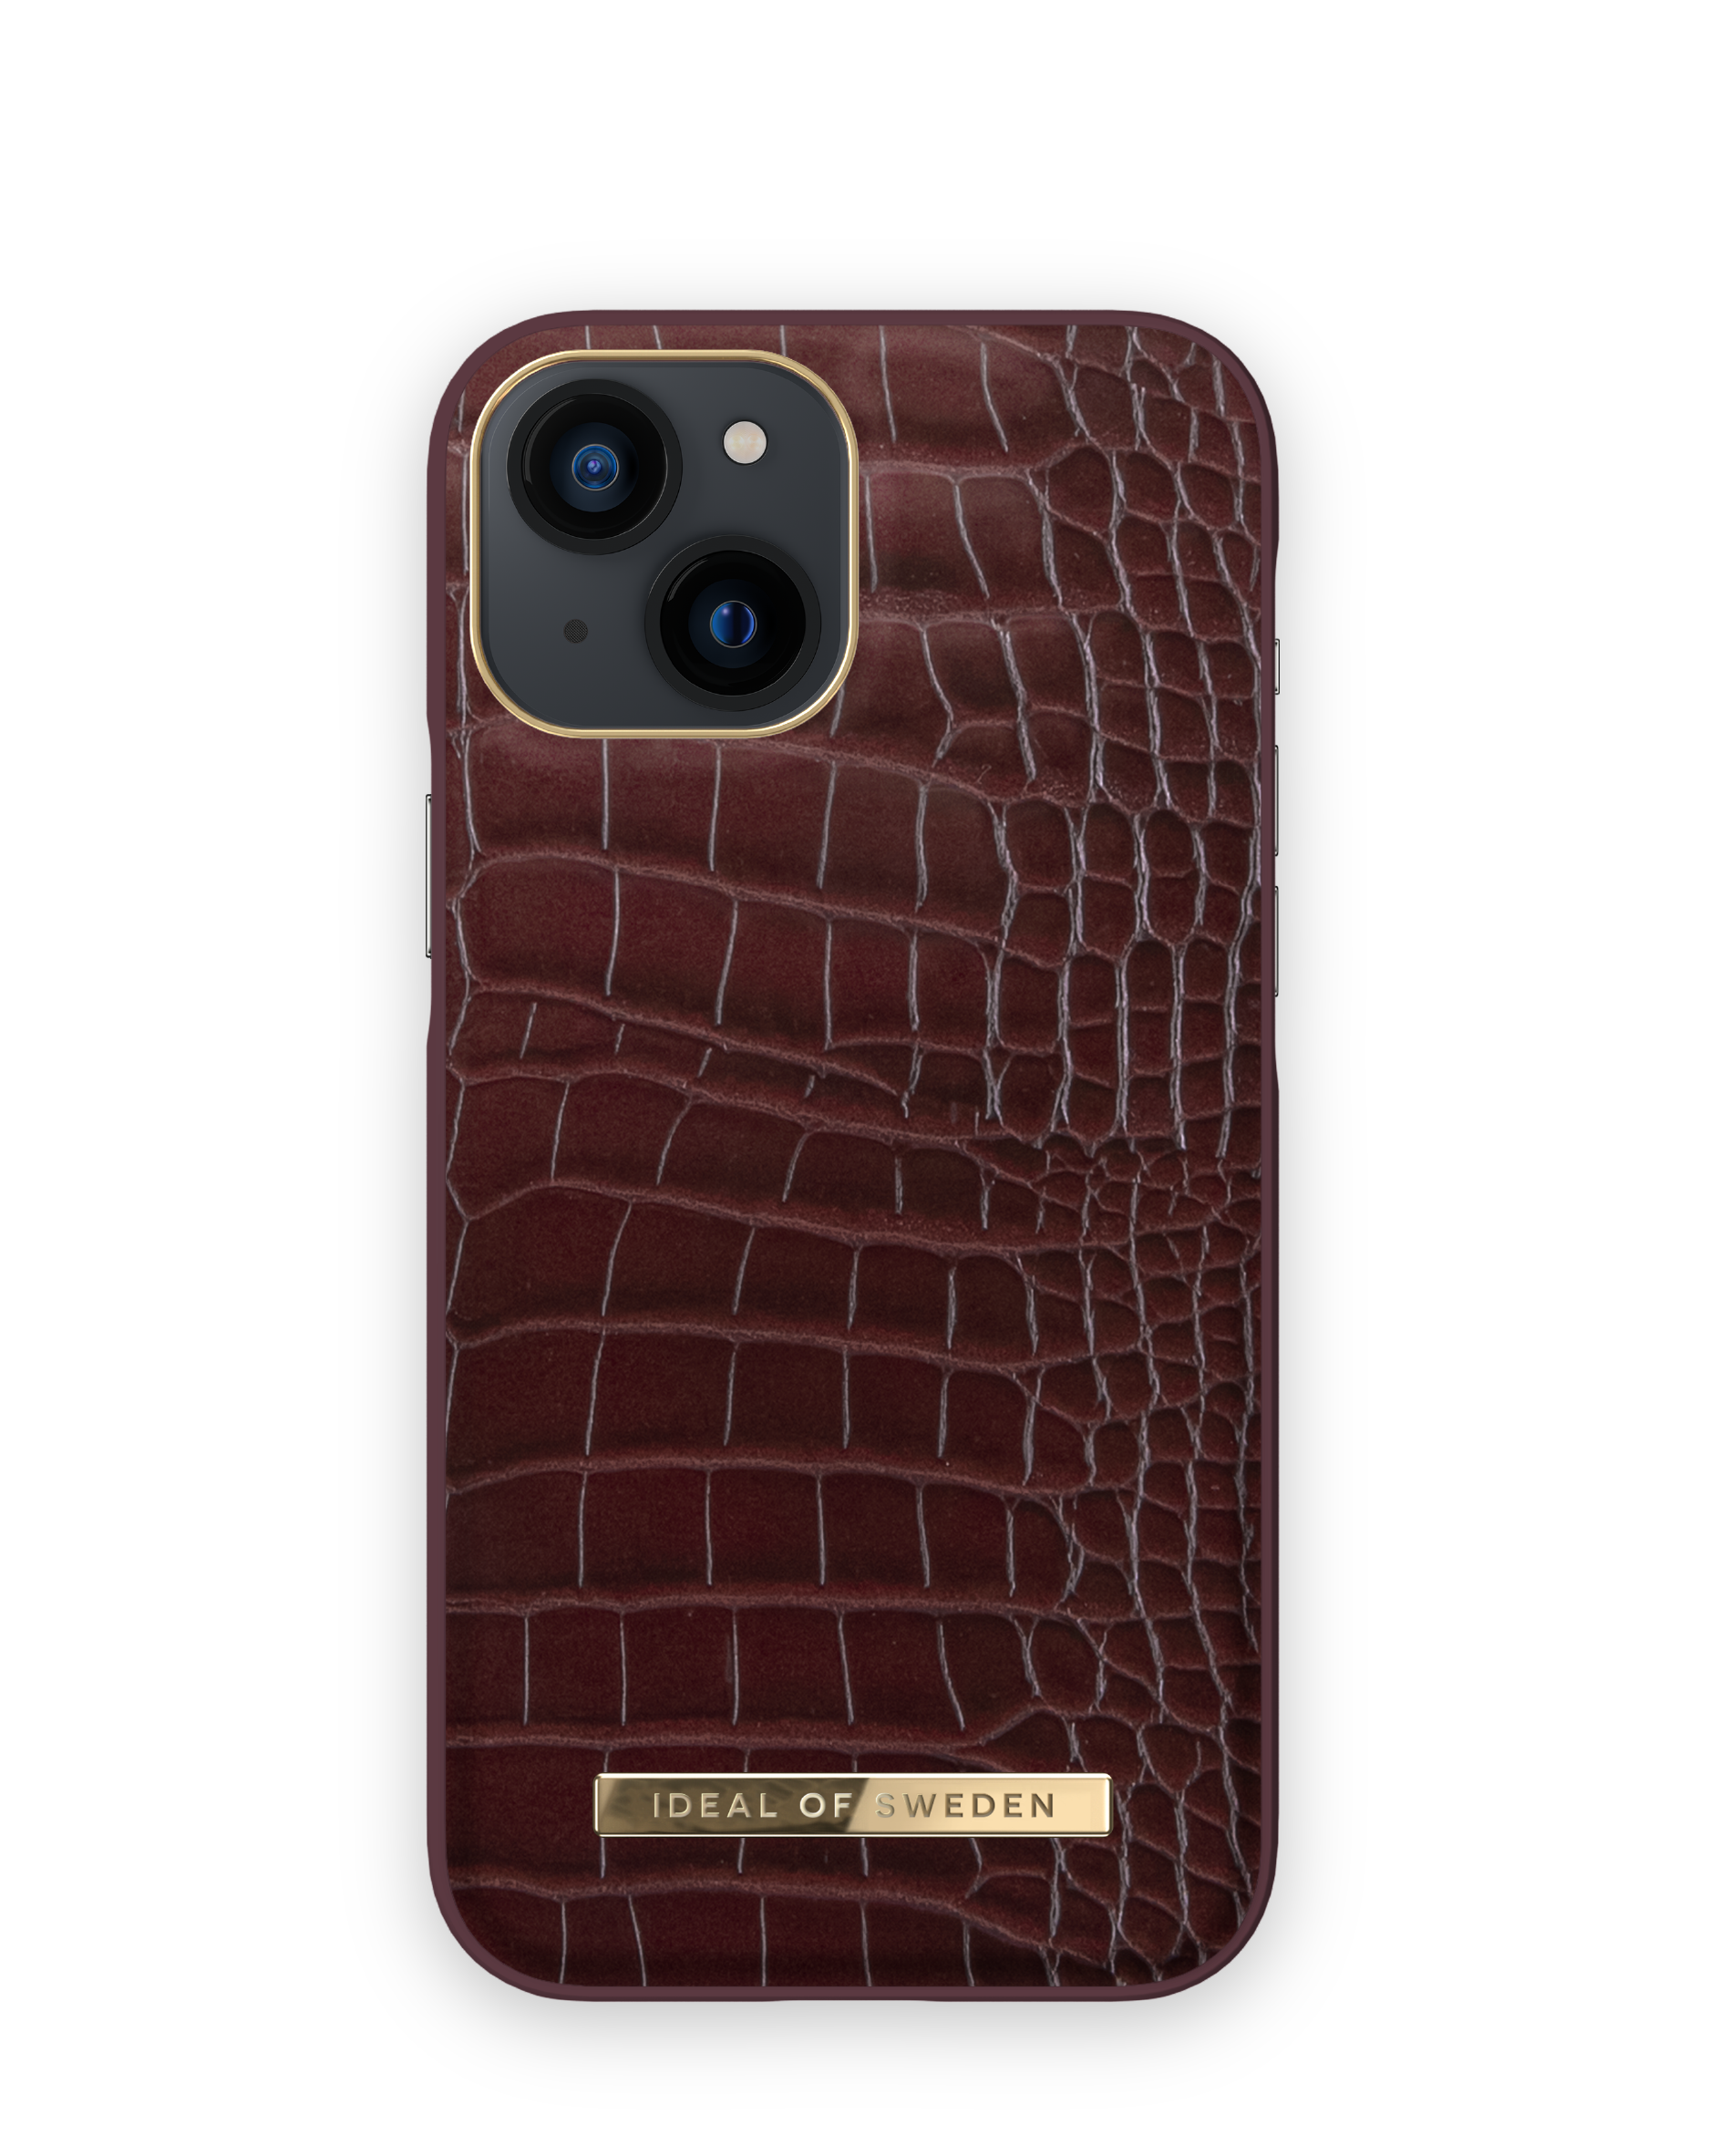 SWEDEN Croco IDEAL 13 OF Mini, Backcover, iPhone IDACAW21-I2154-326, Apple, Scarlet